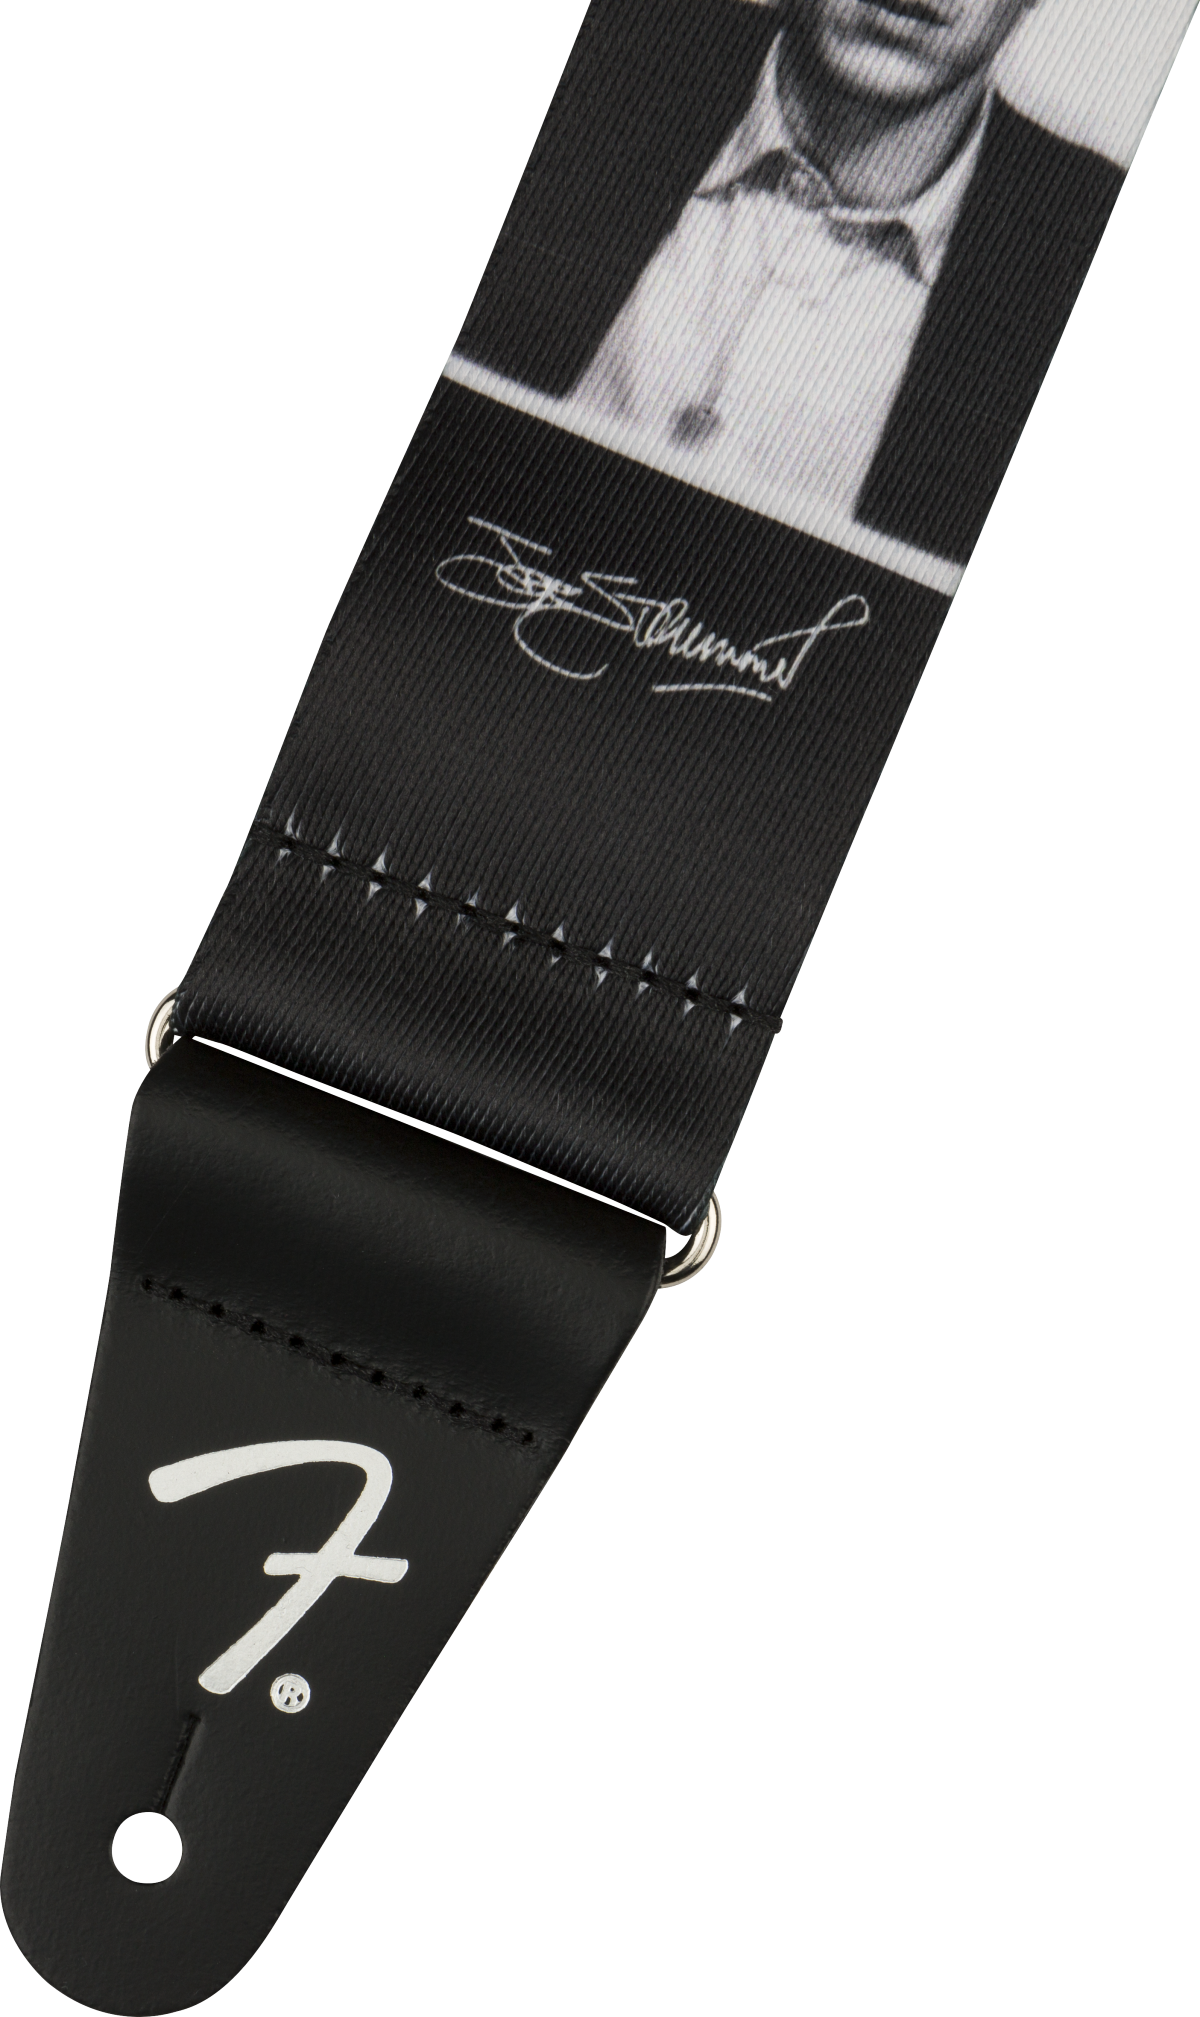 Fender Joe Strummer Know Your Rights Guitar Strap Signature Polyester - Sangle Courroie - Variation 2